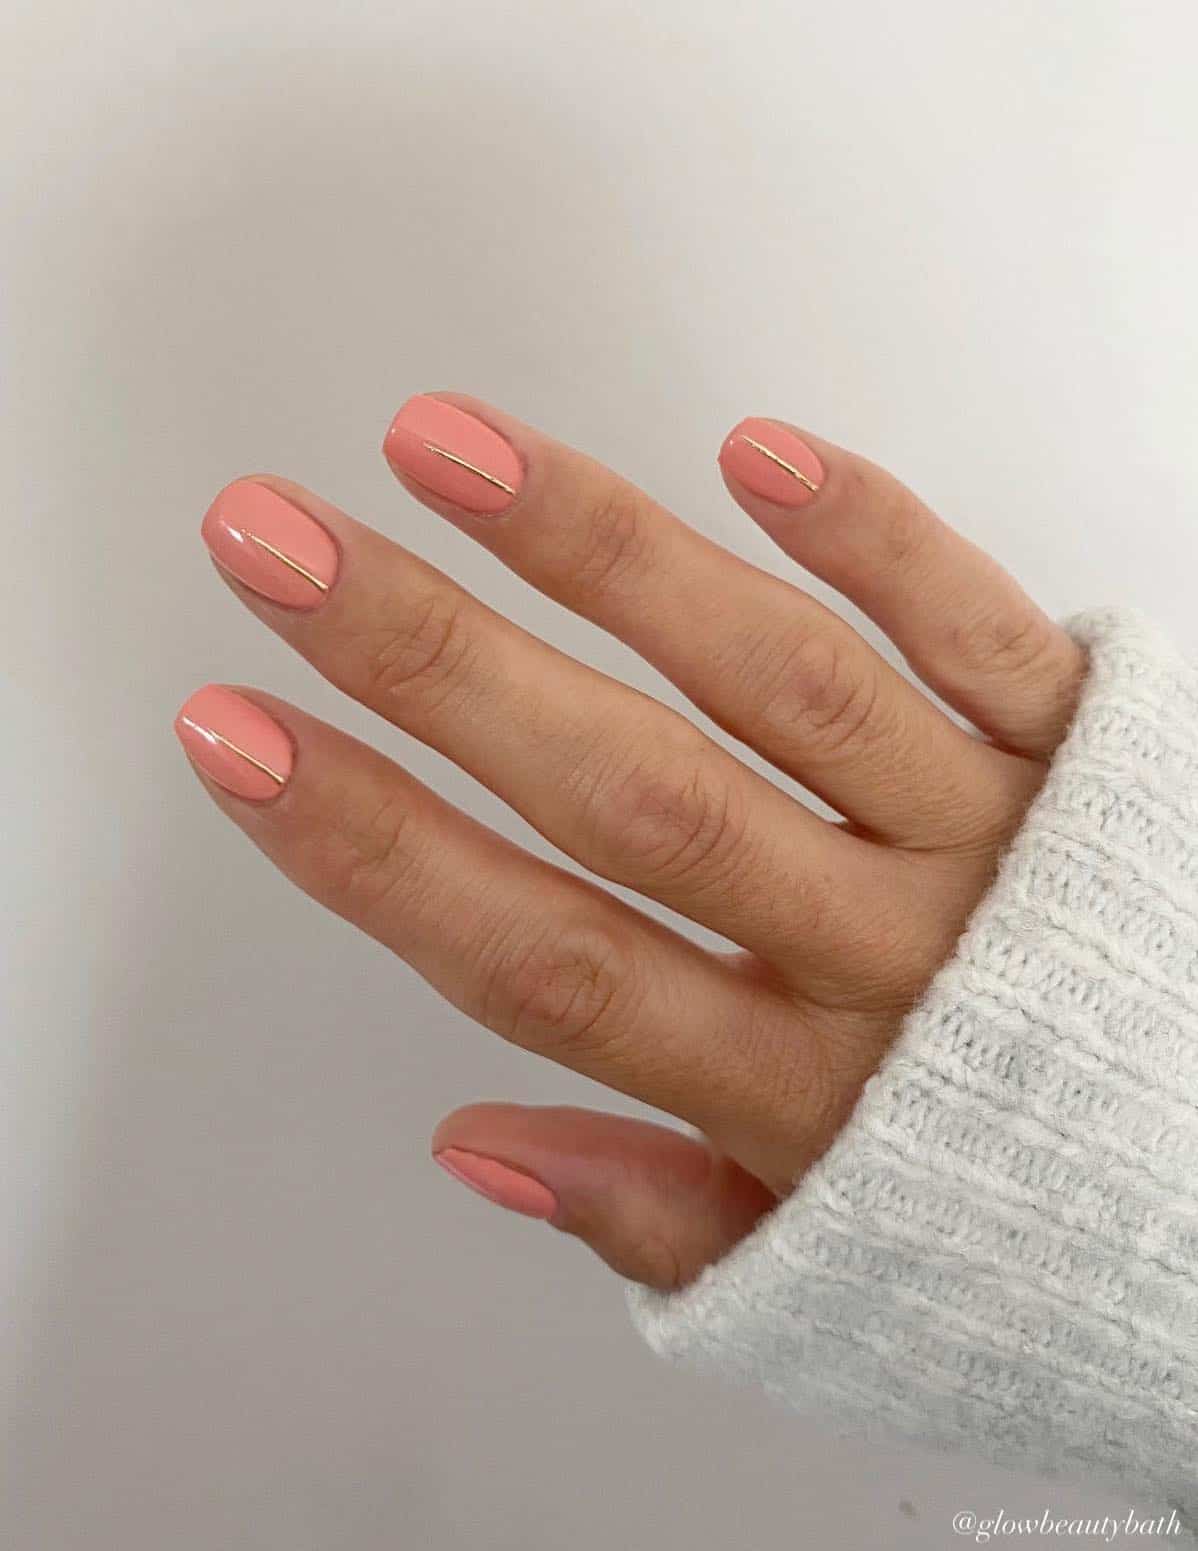 A hand with short square nails painted coral peach with a gold stripe on each fingernail